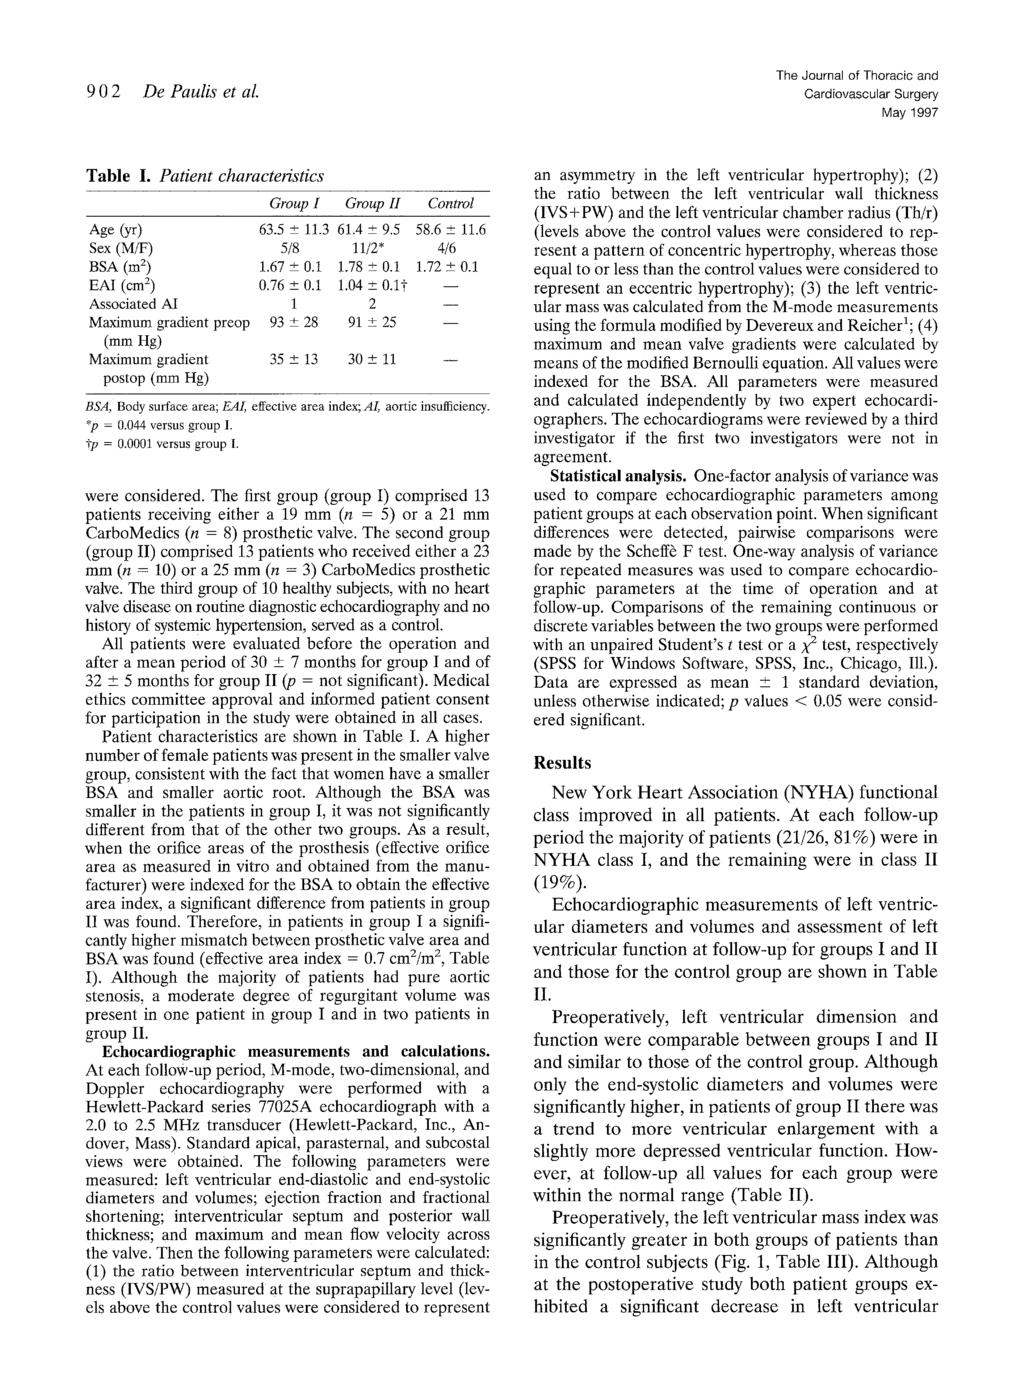 9 0 2 De Paulis et al. The Journal of Thoracic and May 1997 Table. Patient characteristics Group Group H Control Age (yr) 63.5 + 11.3 61.4 _+ 9.5 58.6 _+ 11.6 Sex (M/F) 5/8 11/2" 4/6 BSA(m 2) 1.67-+0.